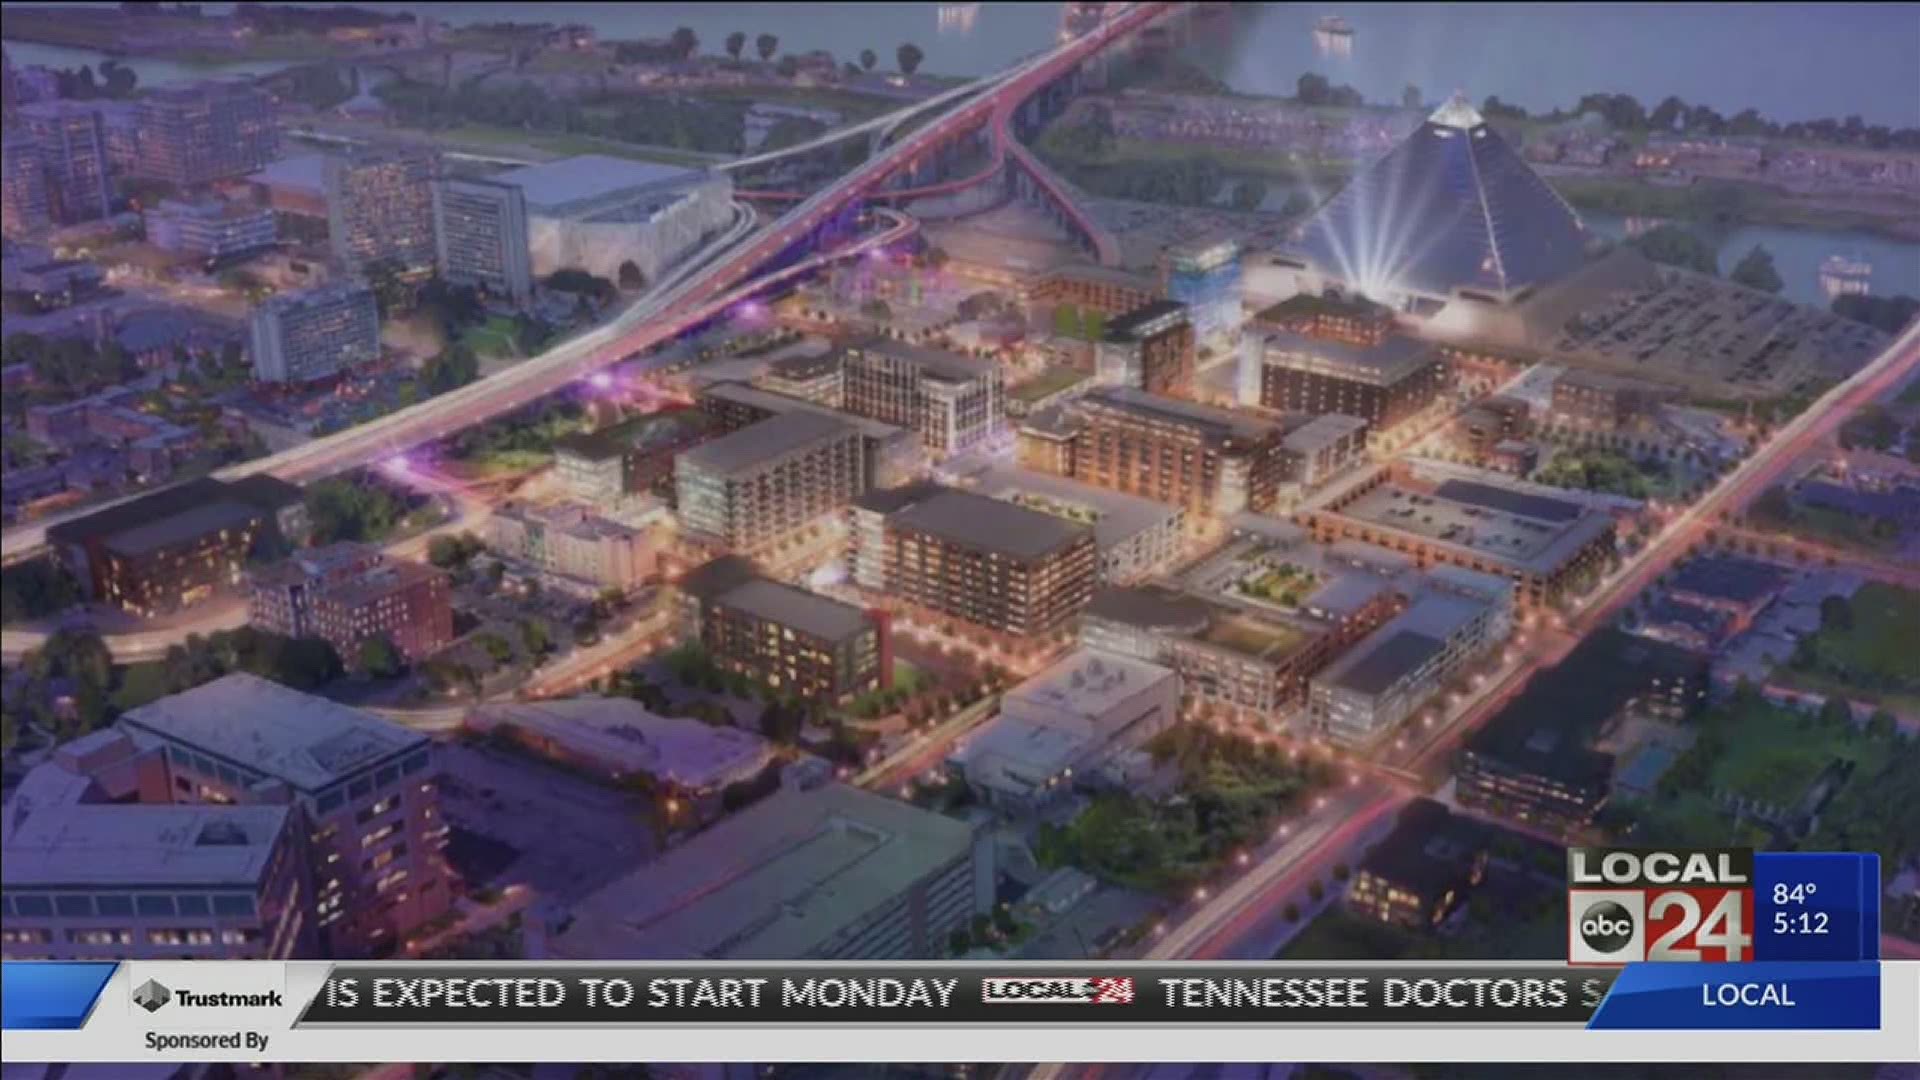 In the plan, Beale Street activity would expand and the current downtown MLGW site would turn into a residential, hospitality, office, and parking concept